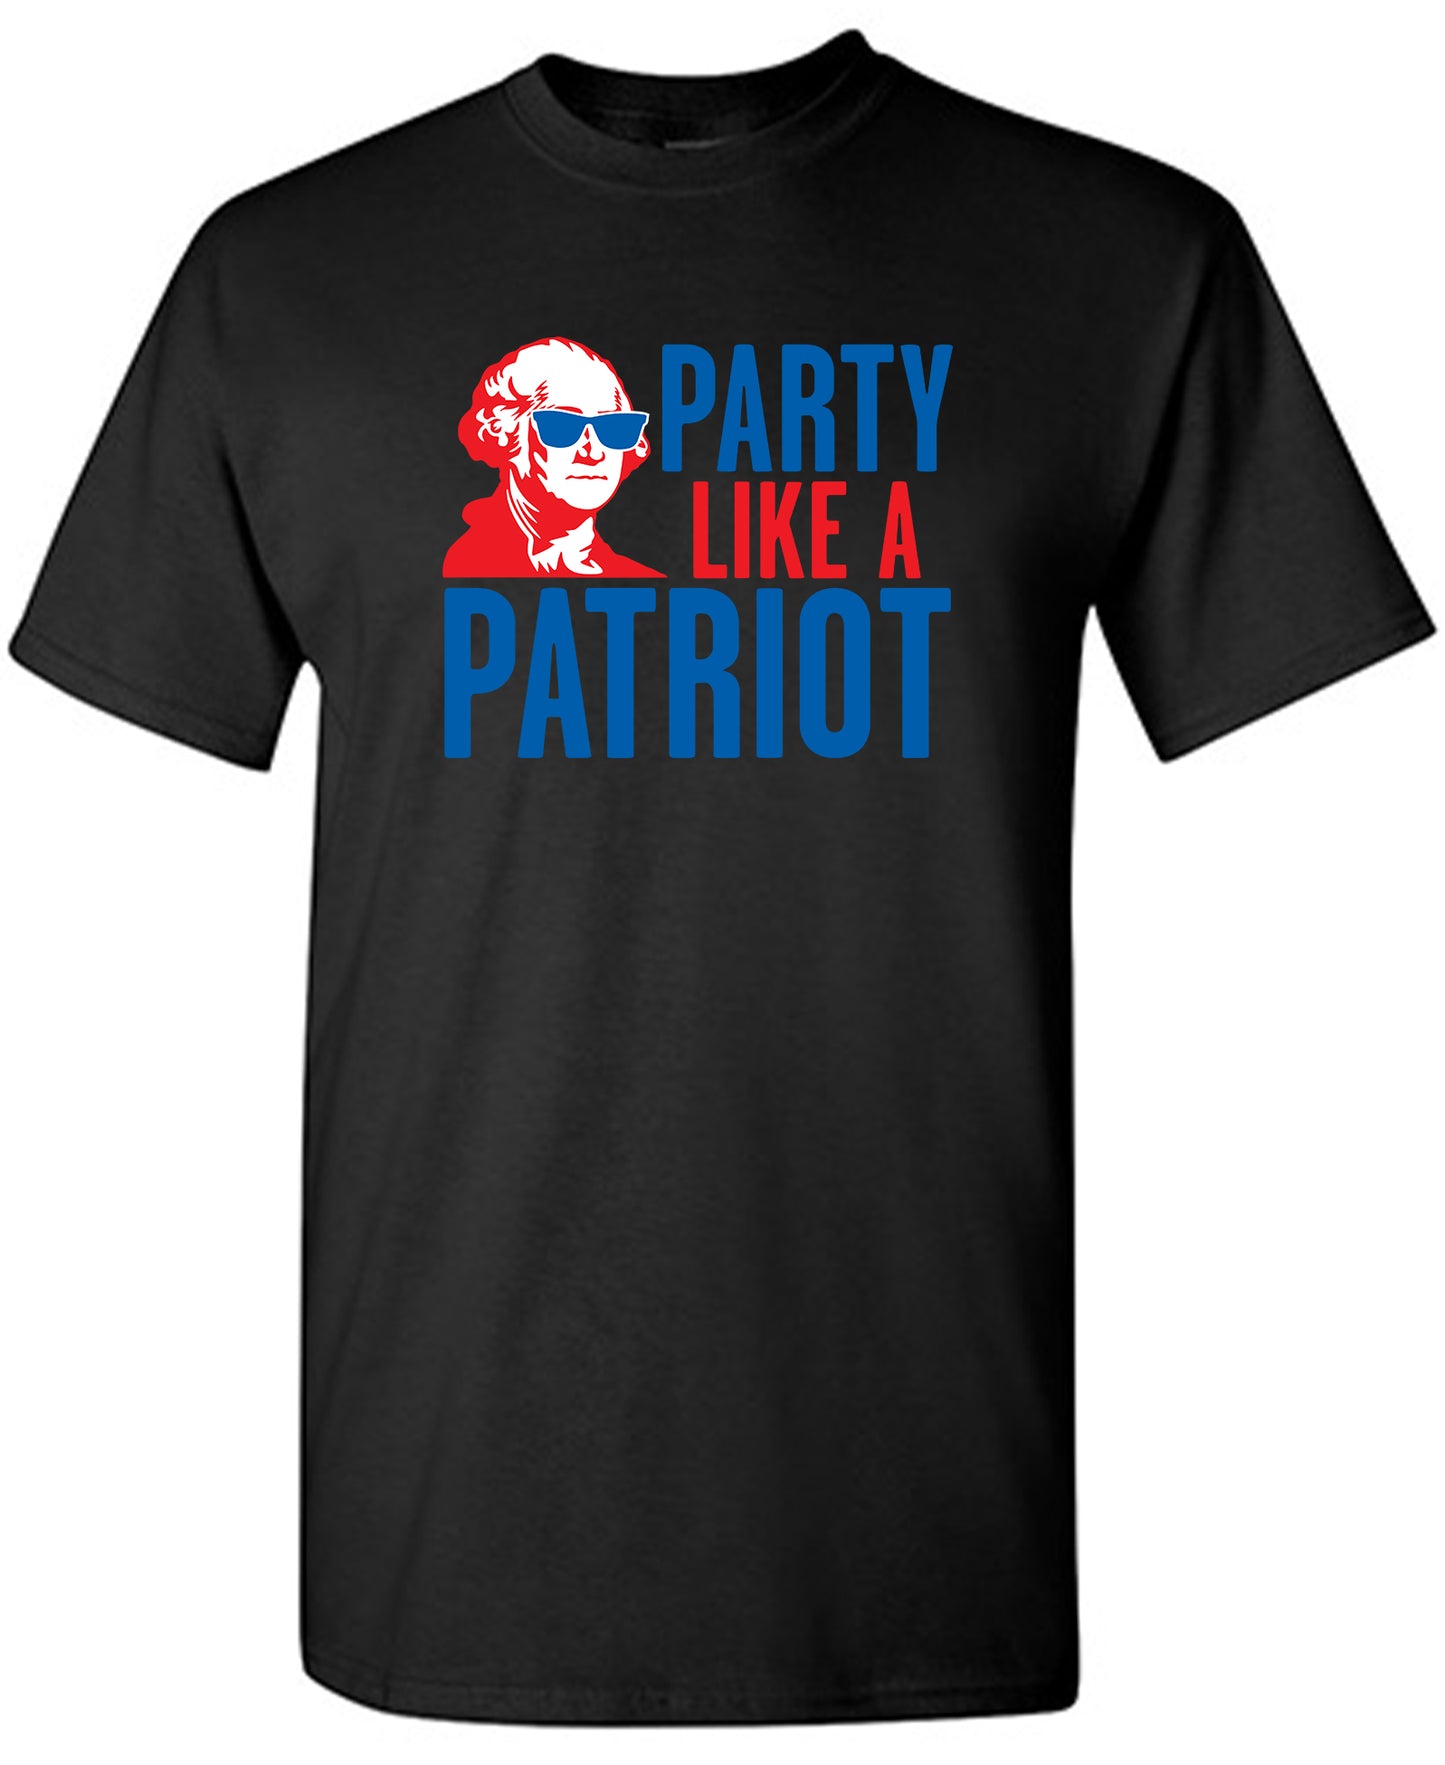 Party Like A Patriot - Funny T Shirts & Graphic Tees